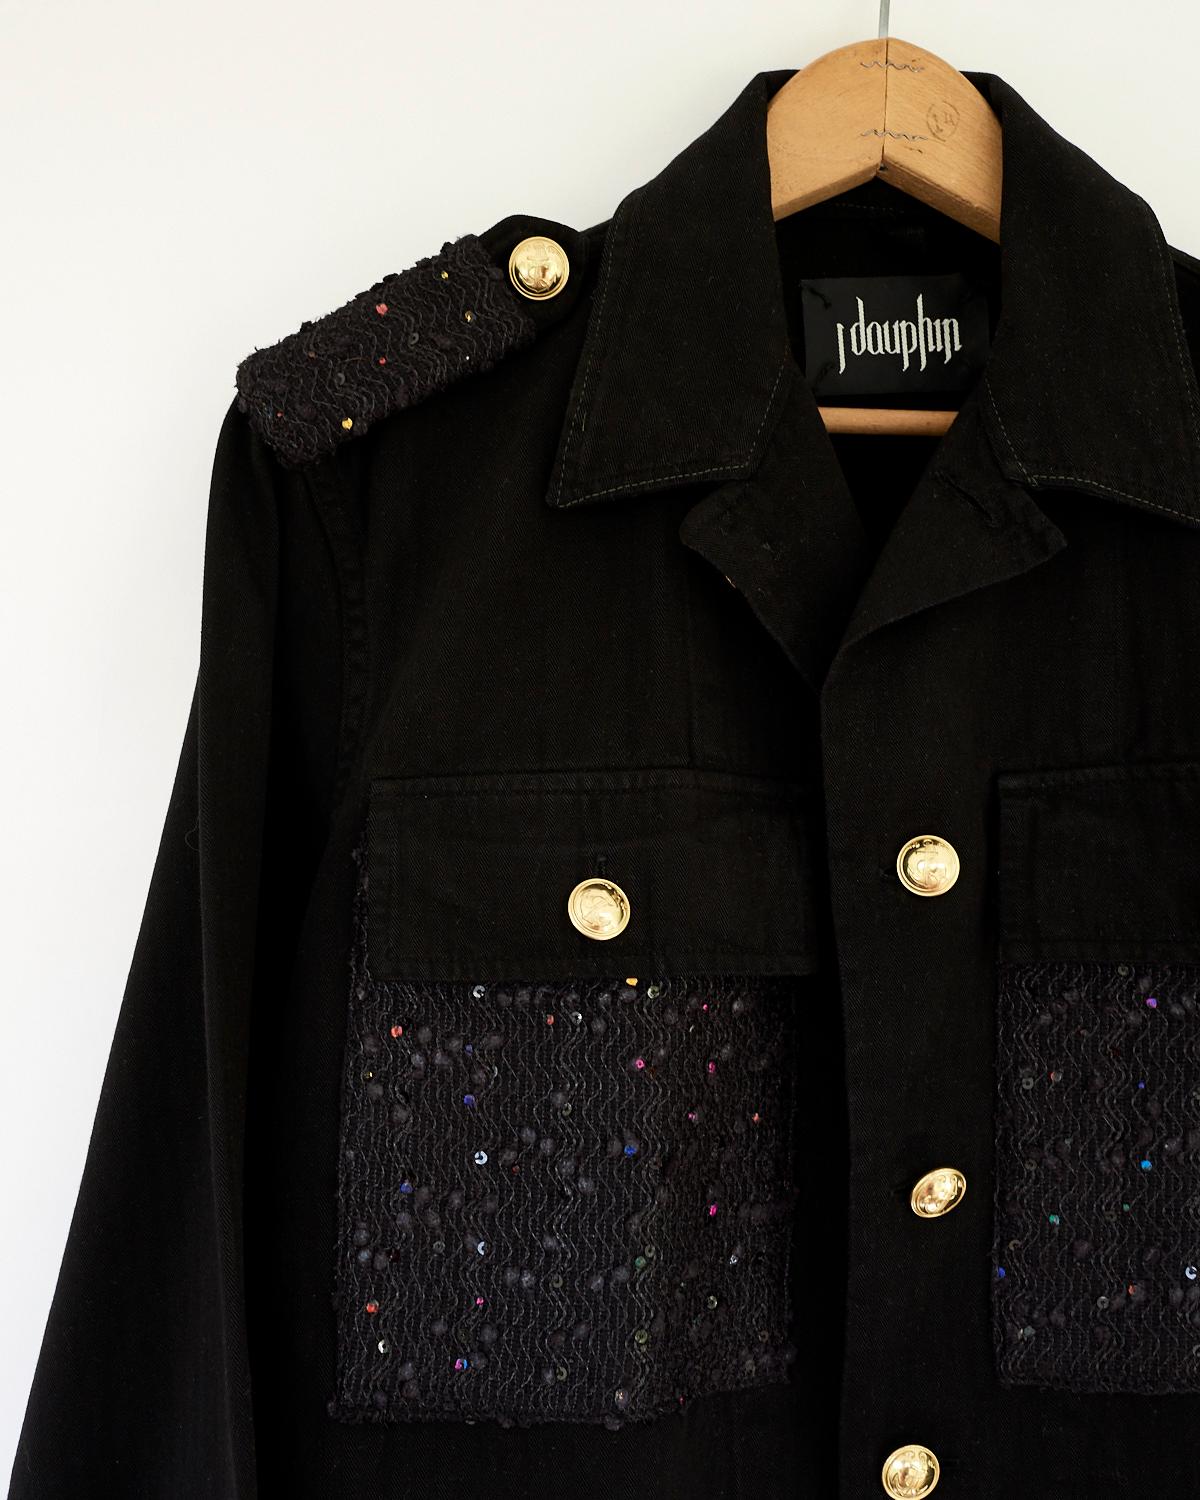 Embellished Jacket Repurposed Black Military Jacket Embellished with French Black Sequin Designer Tweed, Cropped with  Open Elbows and  Epaulettes, Gold Tone Brass Buttons, Jacket 100% Cotton 
Brand: J Dauphin
Size: M/L
Repurposed Vintage,